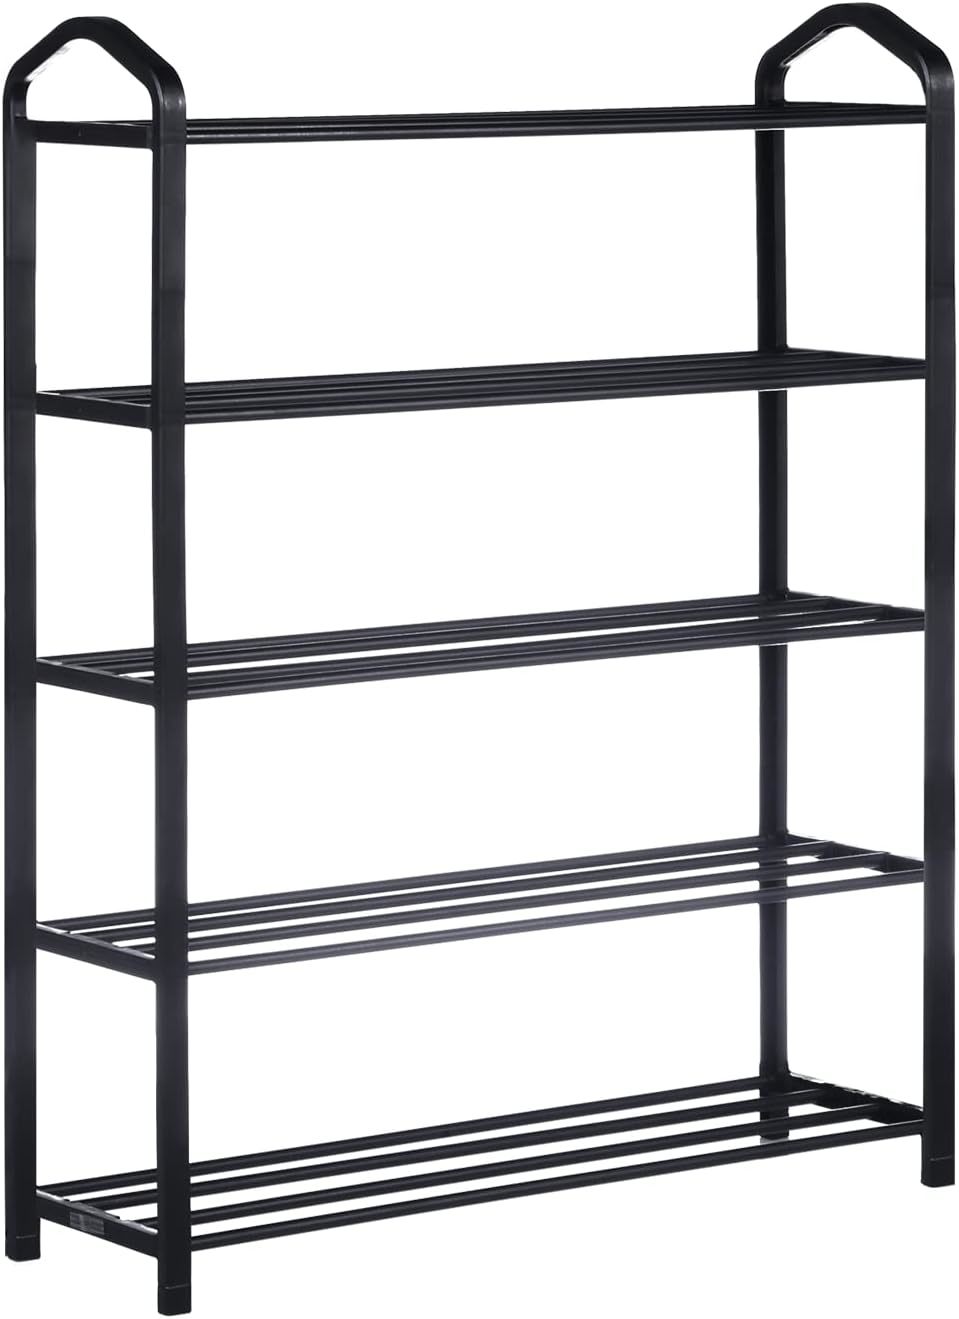 Primary image for Black Shoe Tower For Bedroom, Entryway, Hallway, And Closet By Yssoa, 15 Pairs